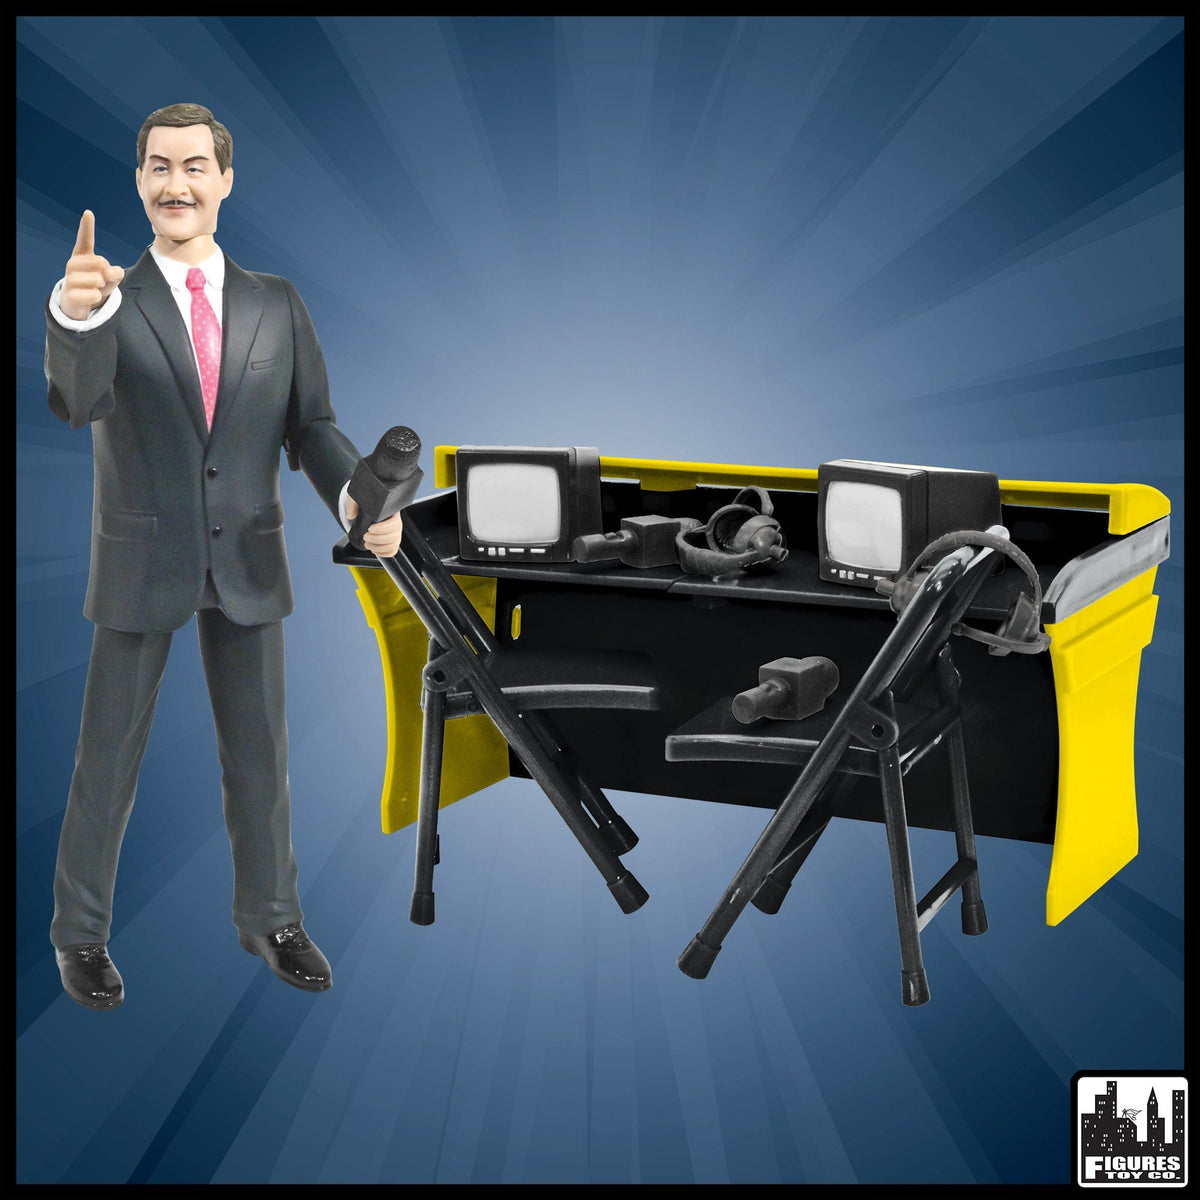 Deluxe Wrestling Figure Commentators Playset with Announcer Figure For WWE Wrestling Action Figures